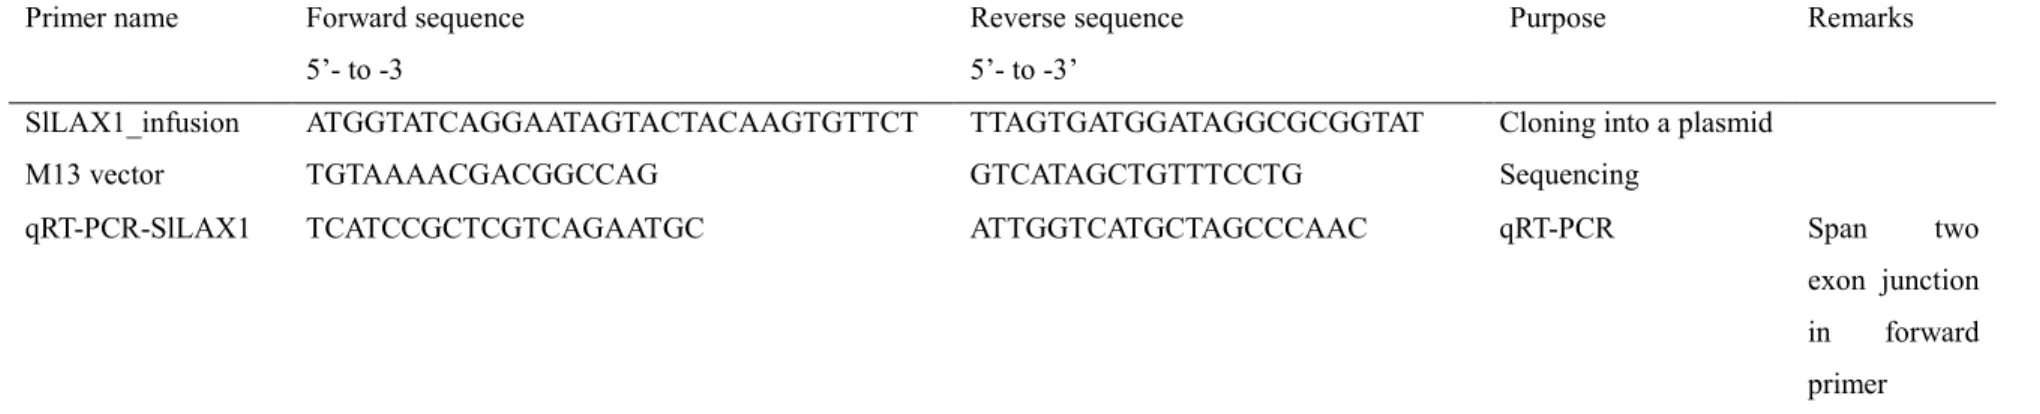 Table 2.7 Primer pair that used for qRT-PCR and gene cloning of SlLAX1 